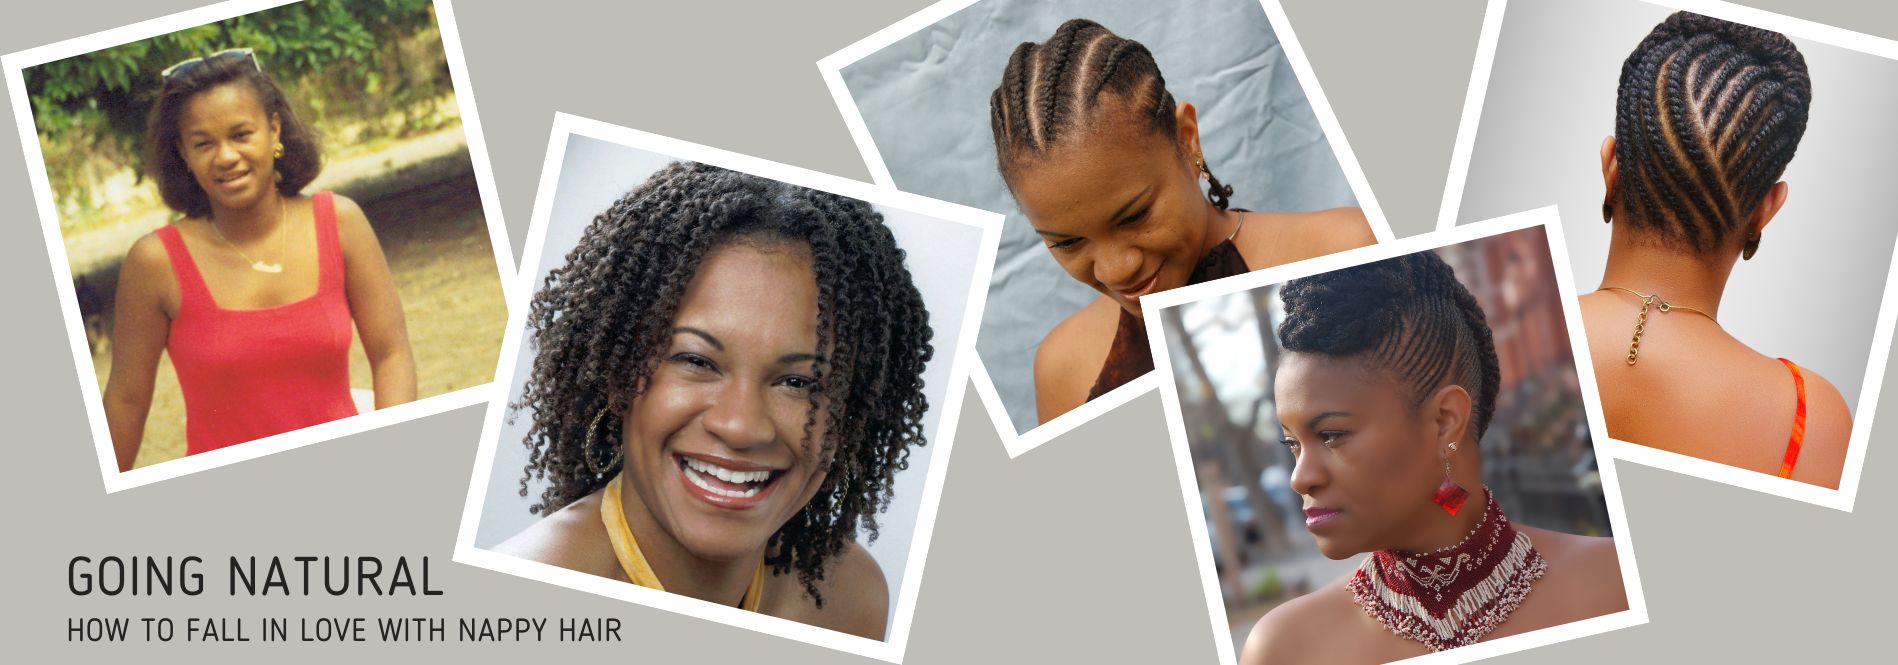 Going Natural Transitioning from relaxed to natural hair